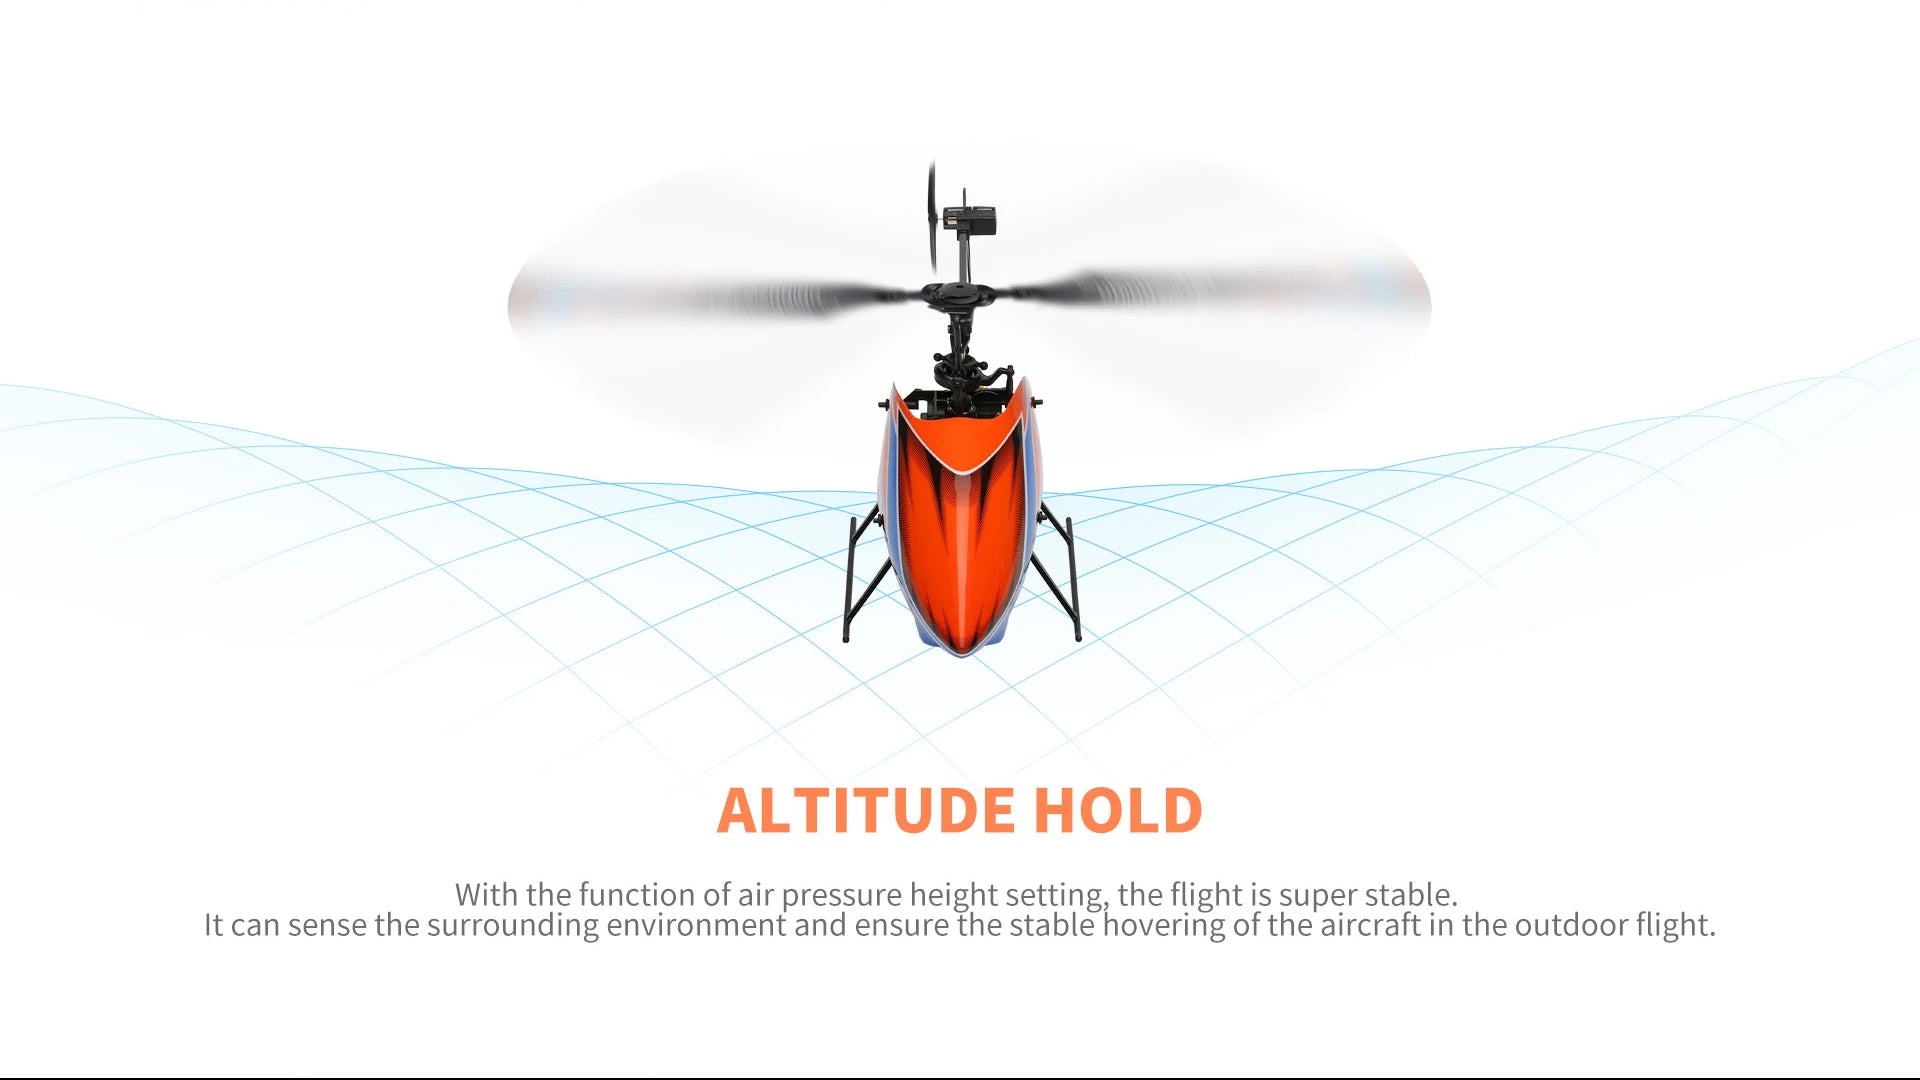 Wltoys K127 Rc Helicopter, the flight is super stable with the function of air pressure height setting . it can sense the